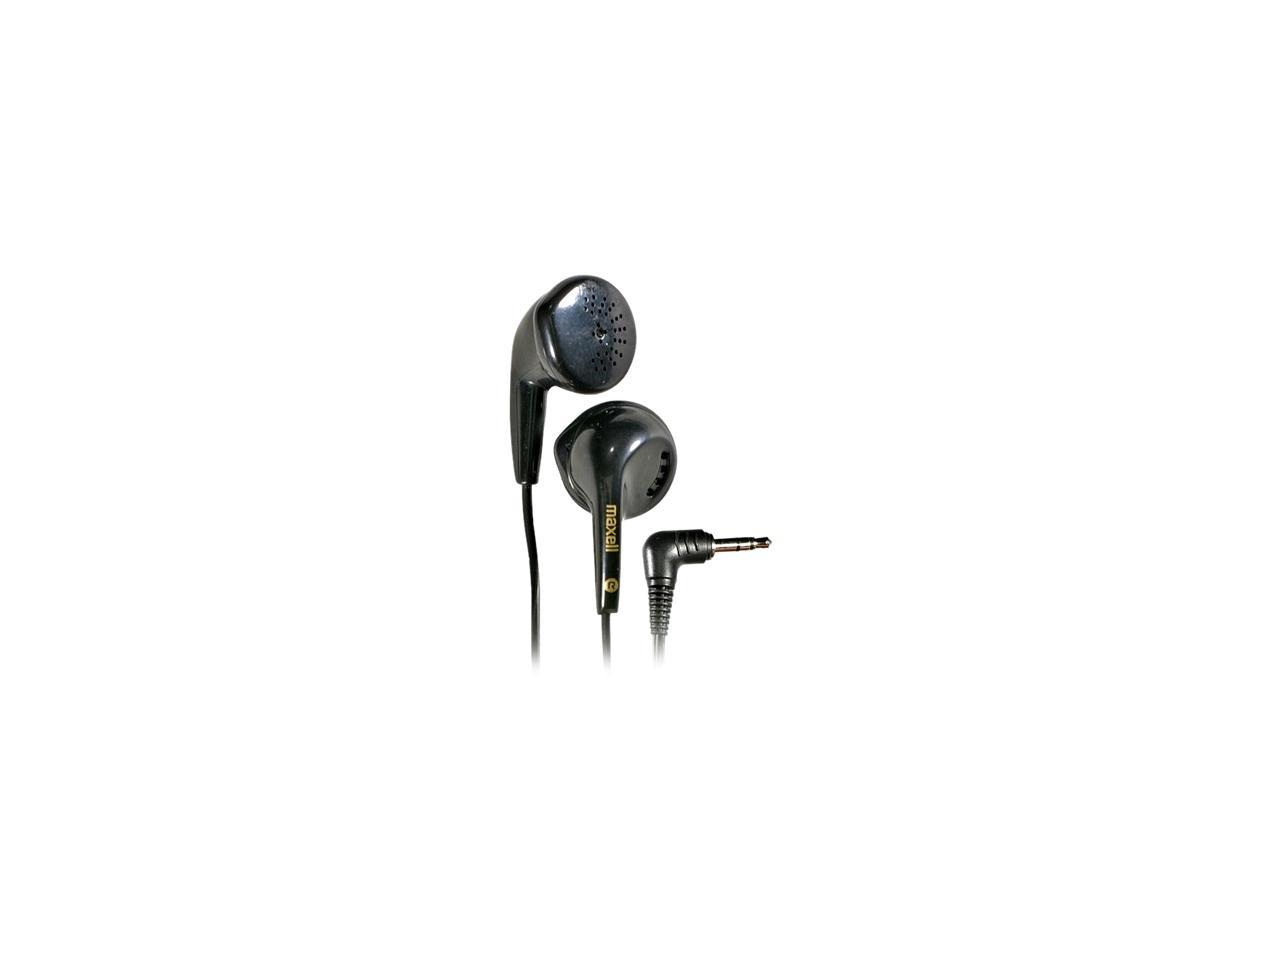 Maxell 190560 Eb95 Dynamic Earbuds Black for sale online 